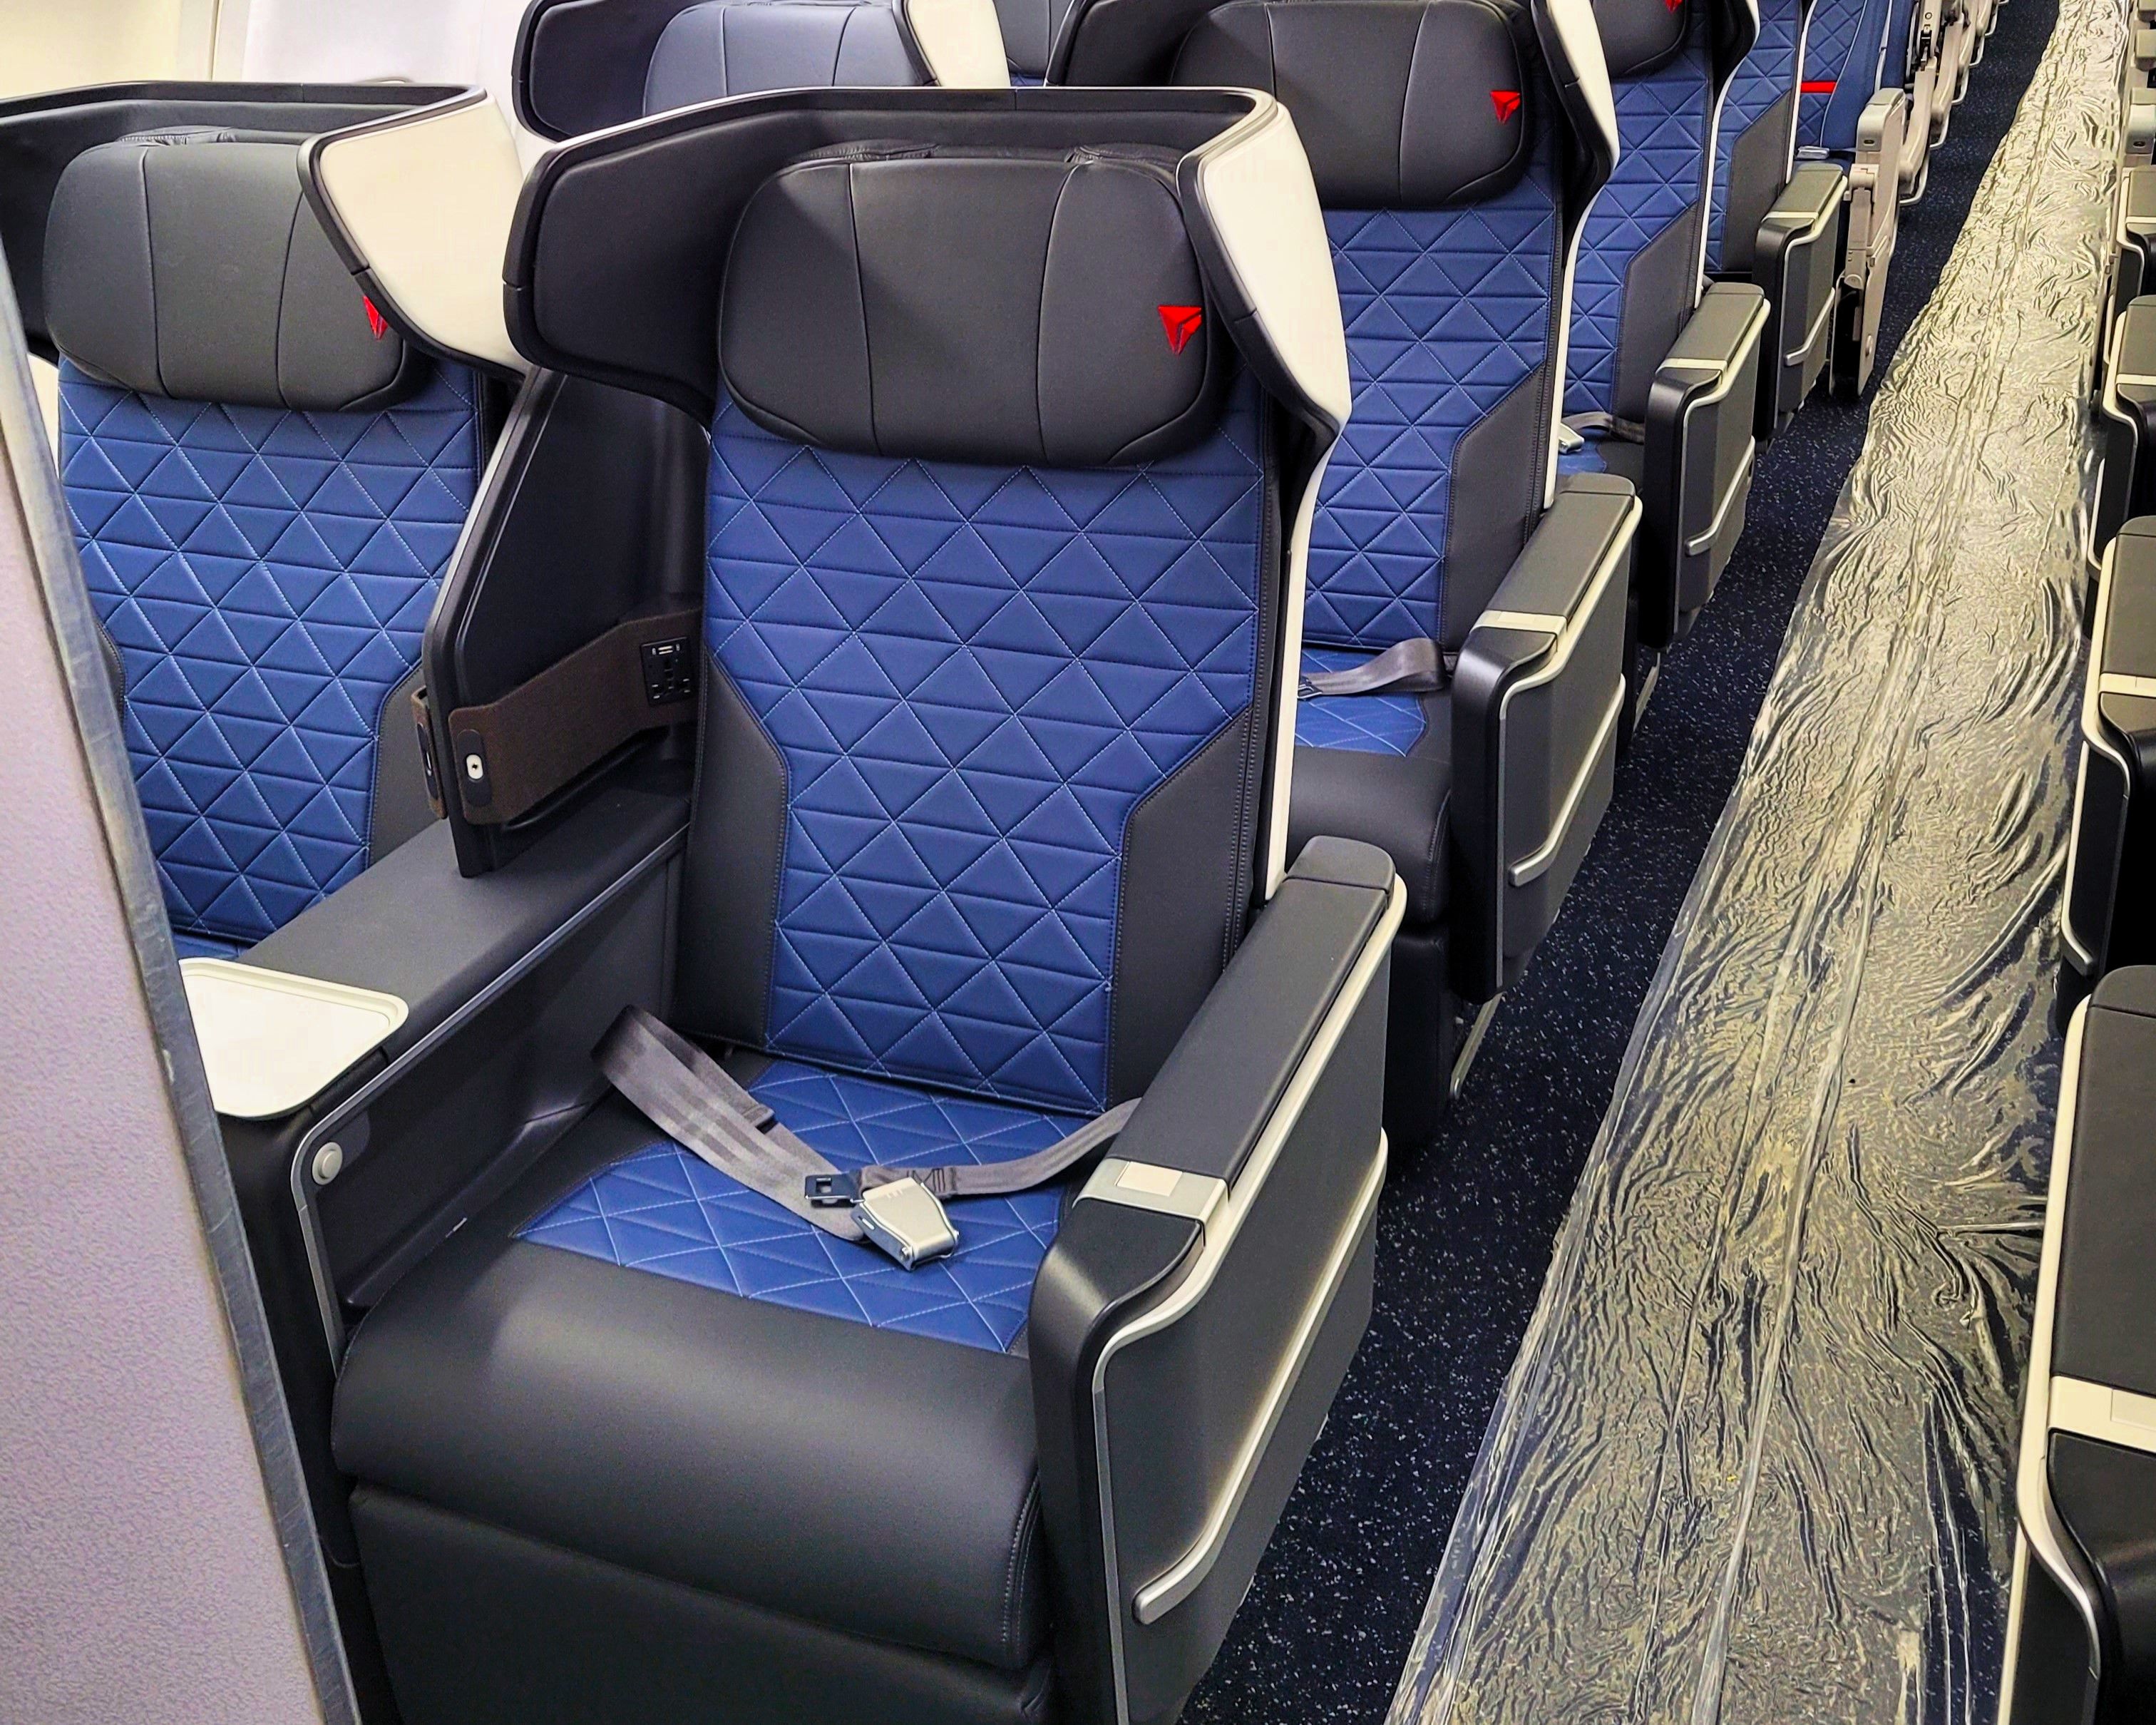 Delta Boeing 737-800 domestic First Class seats.